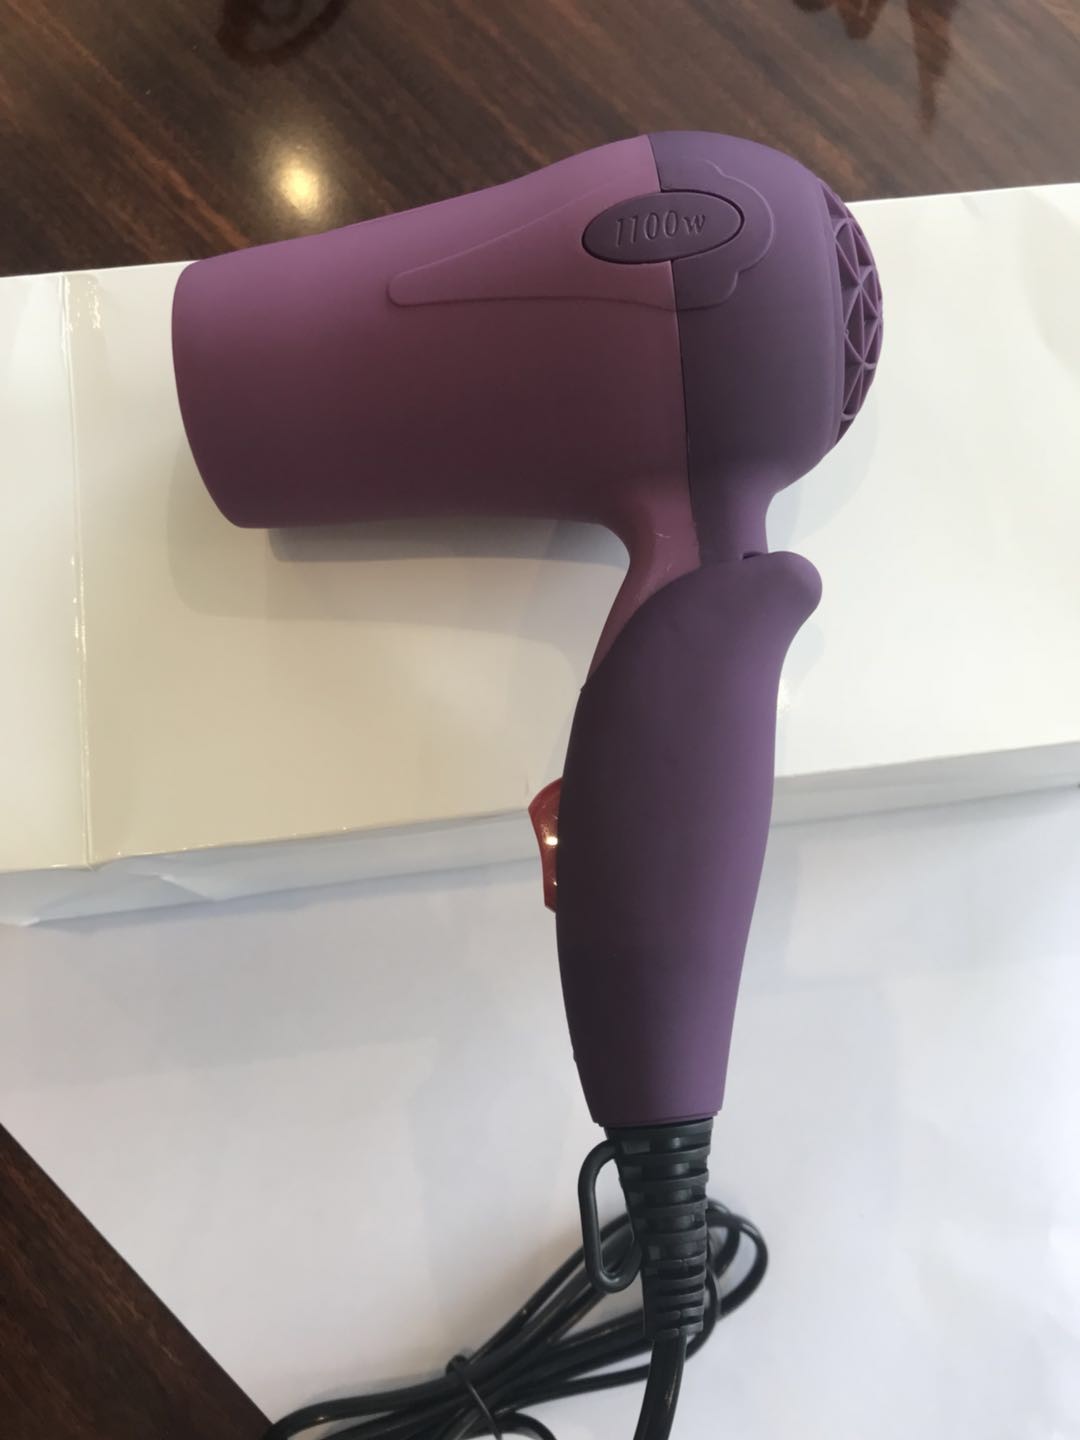 Professional Foldable Travel Hair Dryer With Long Life DC Motor Powerful 1100W